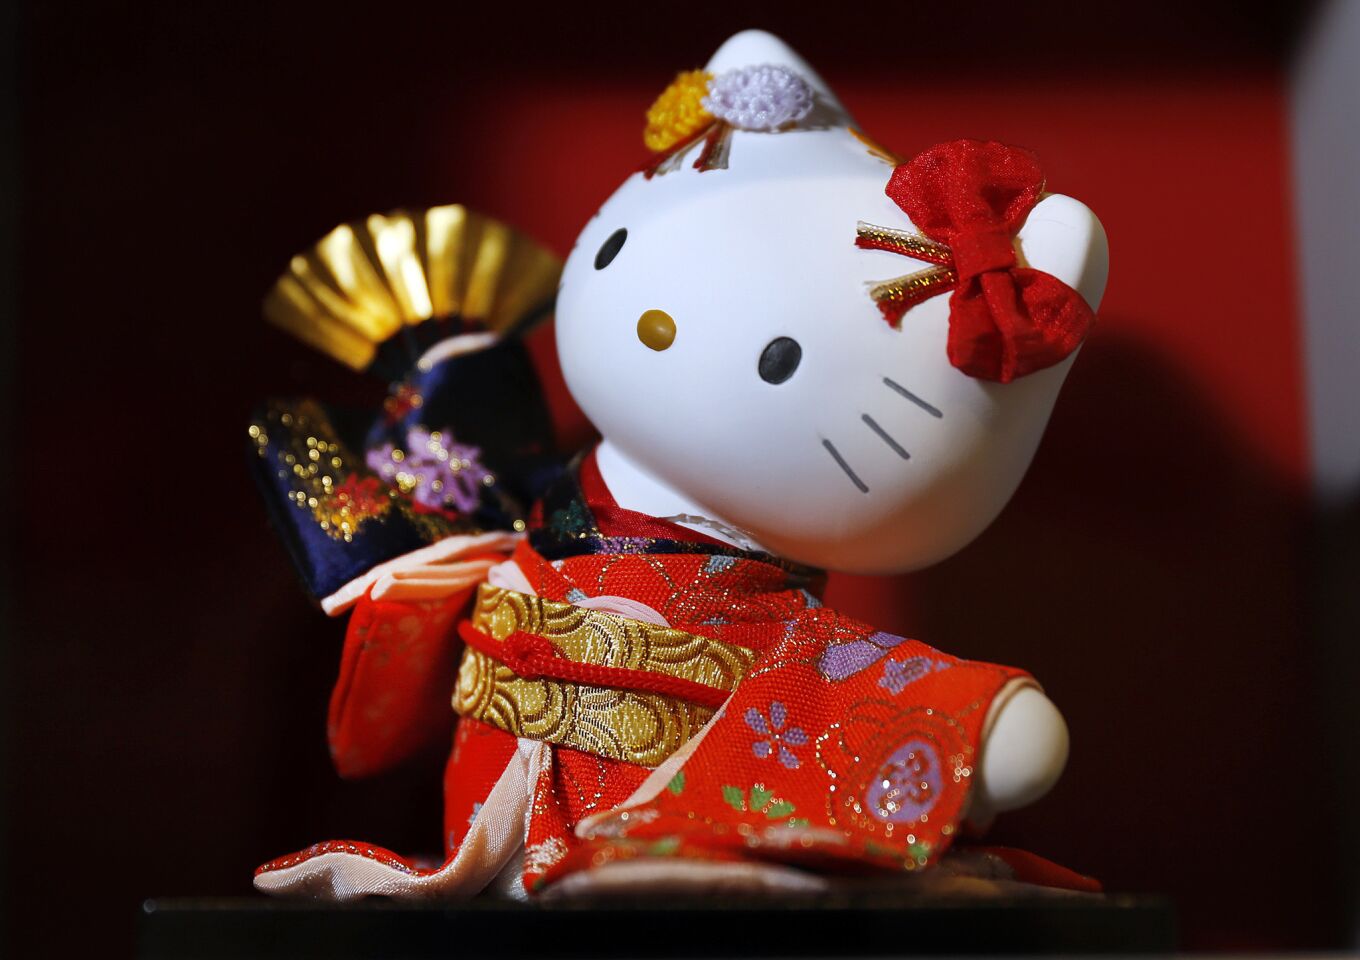 Arts and culture in pictures by The Times | 'Hello! Exploring the Supercute World of Hello Kitty'